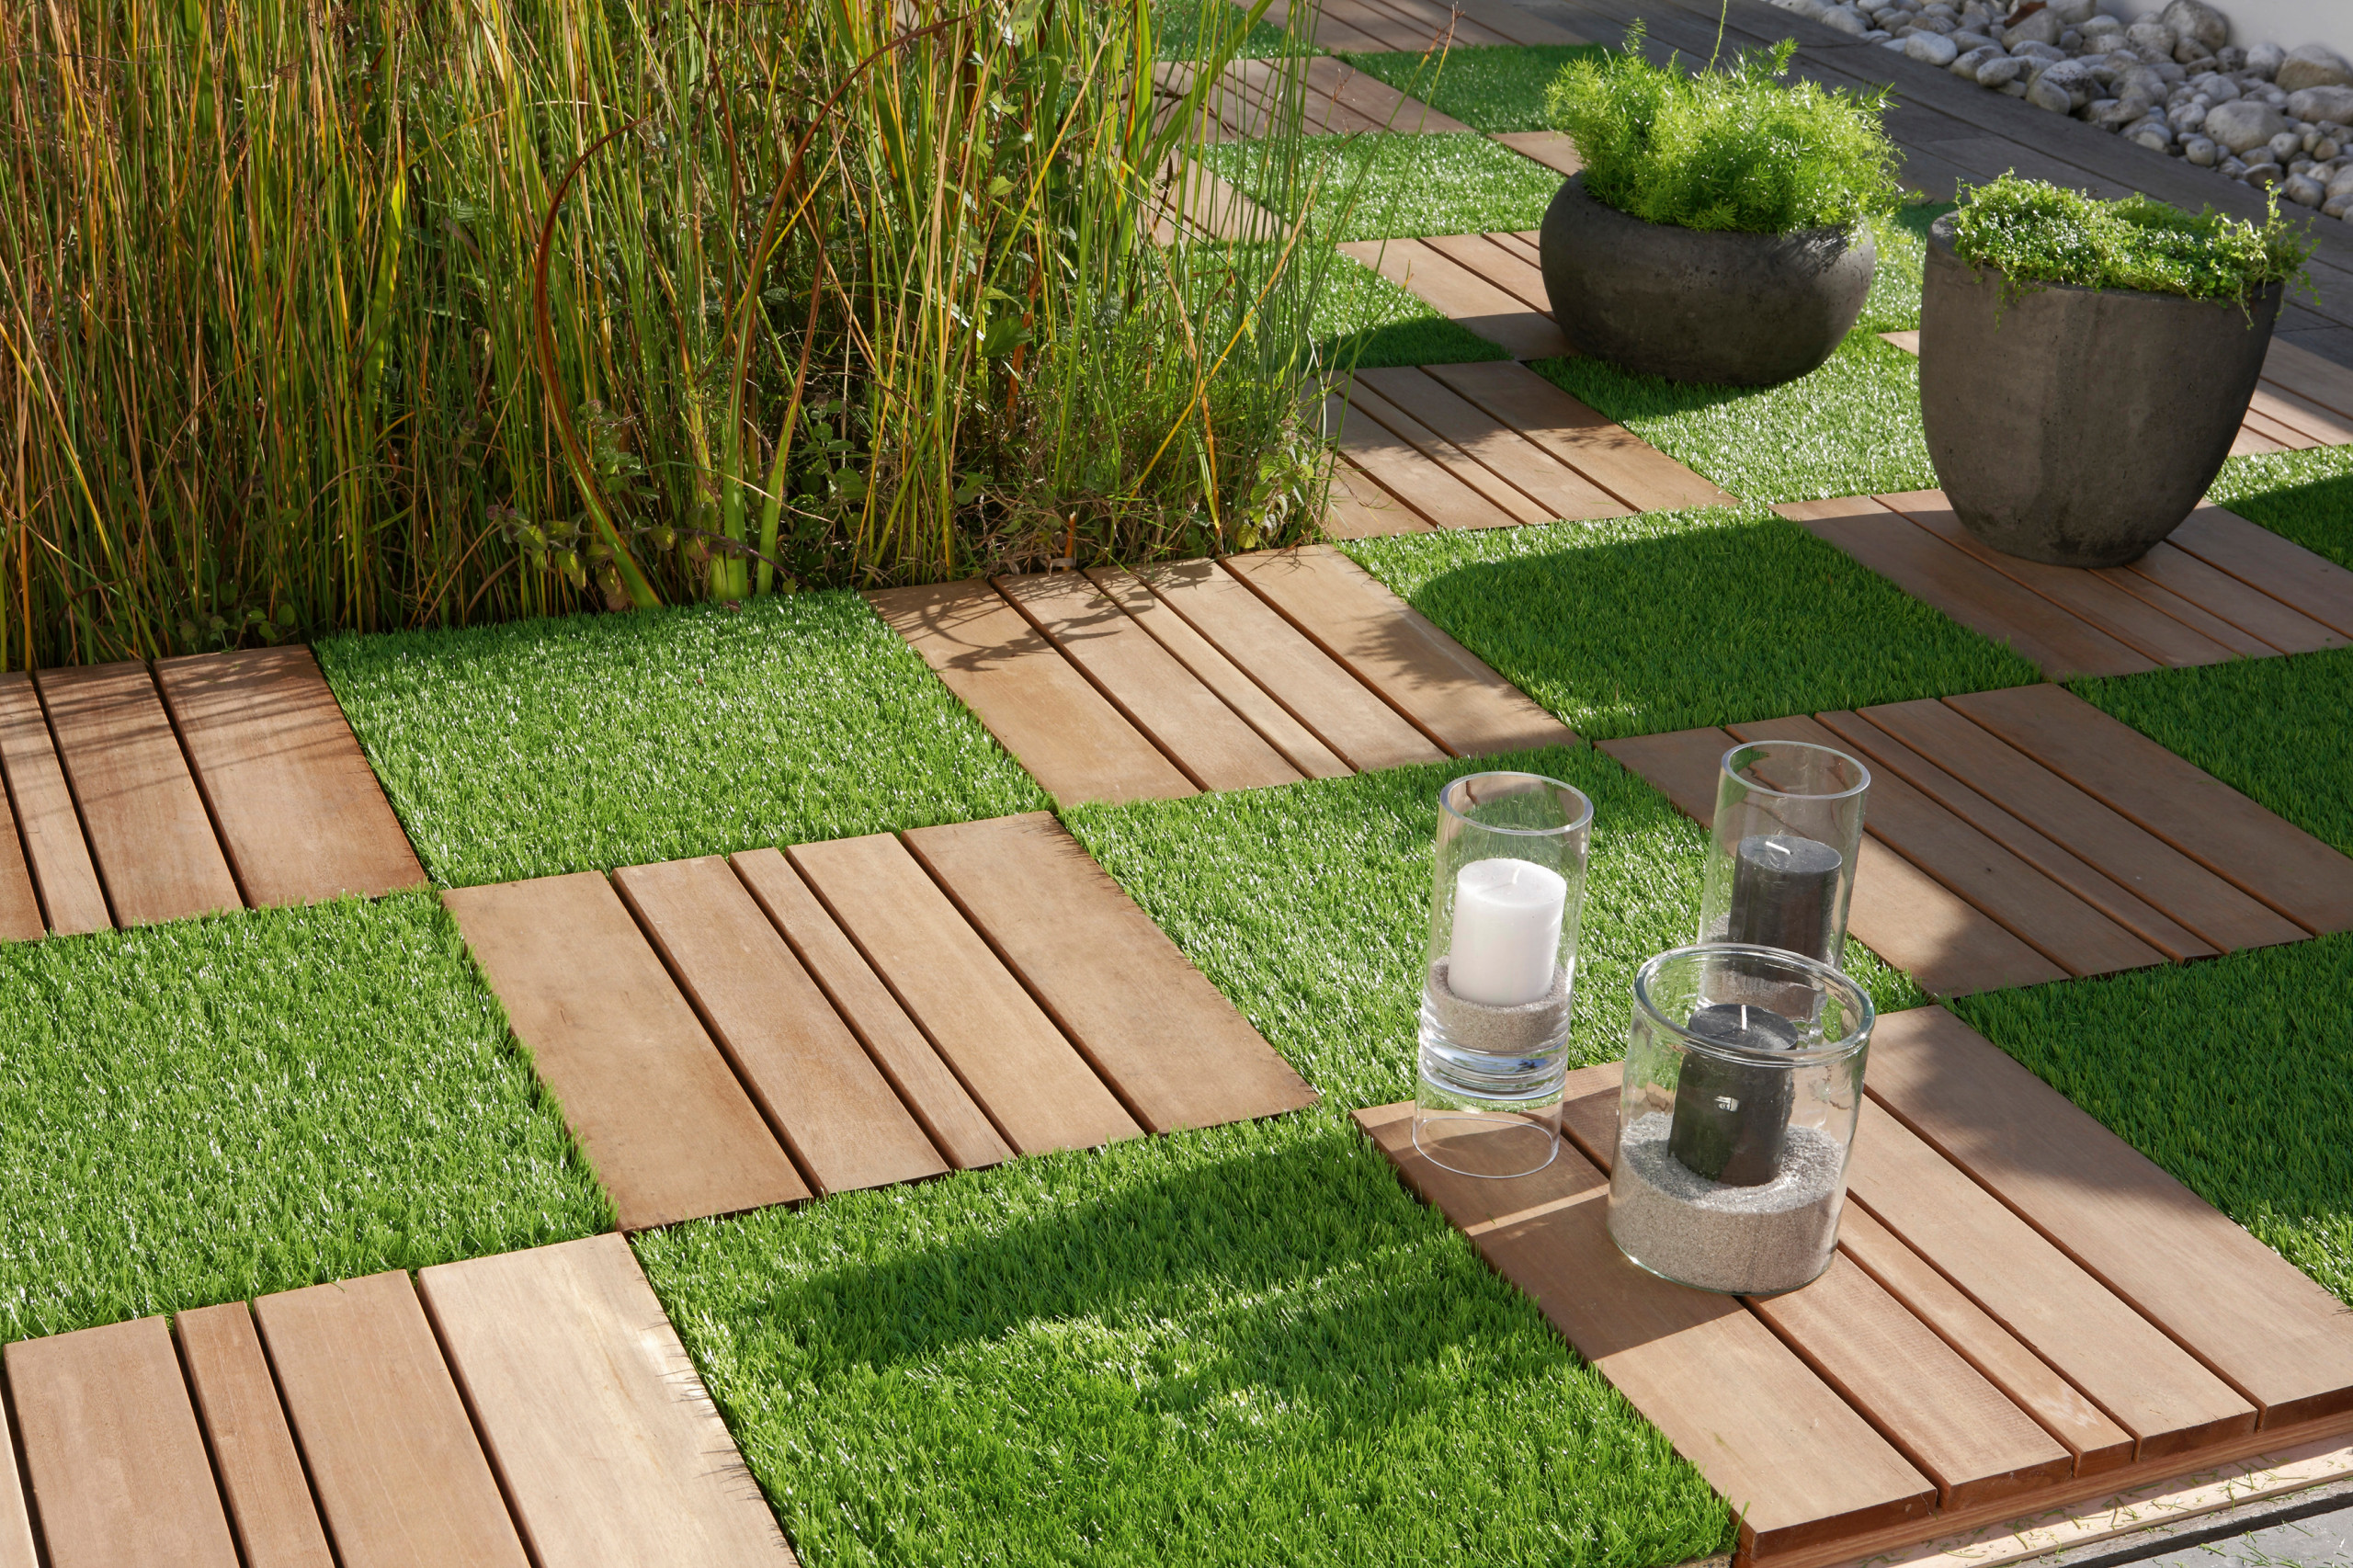 Terrasse - Contemporary - Deck - Lille - by Leroy Merlin OFFICIEL | Houzz